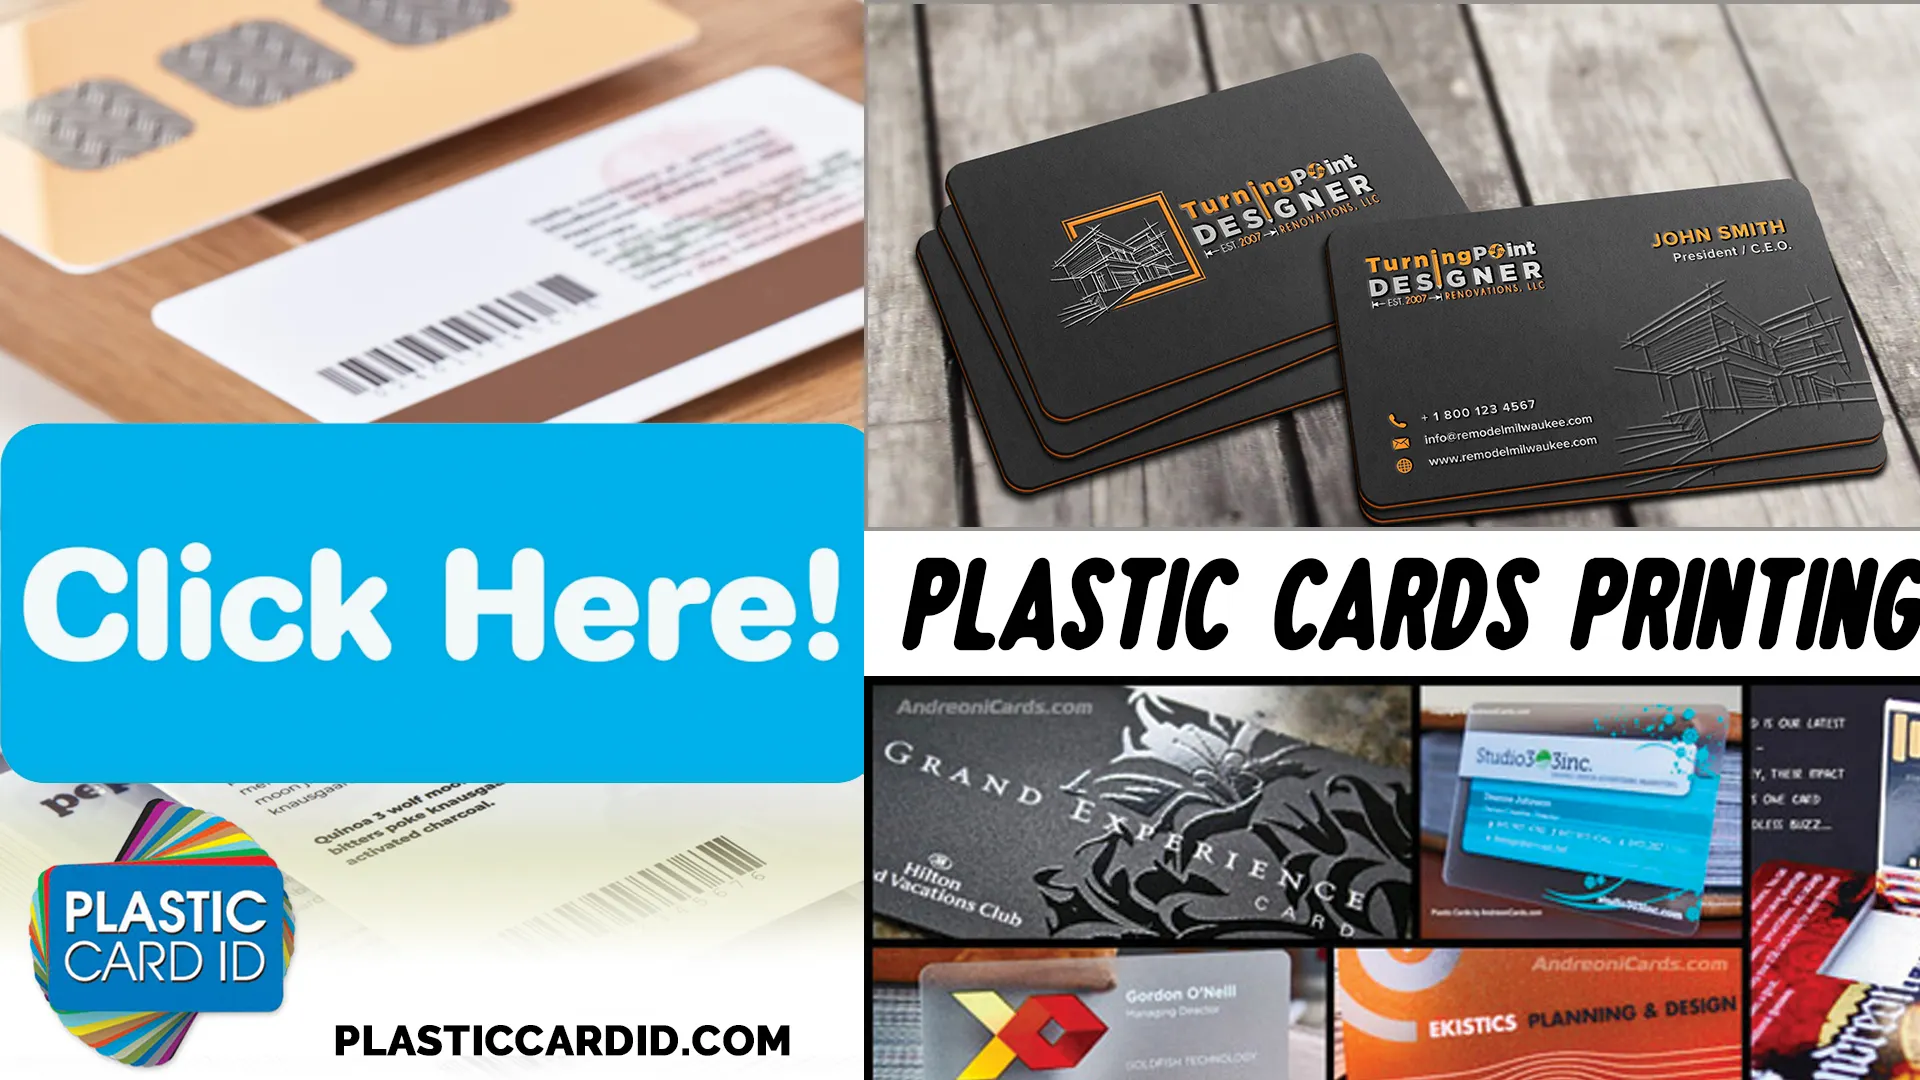 Catering to Various Industries with Precise Card Sizing